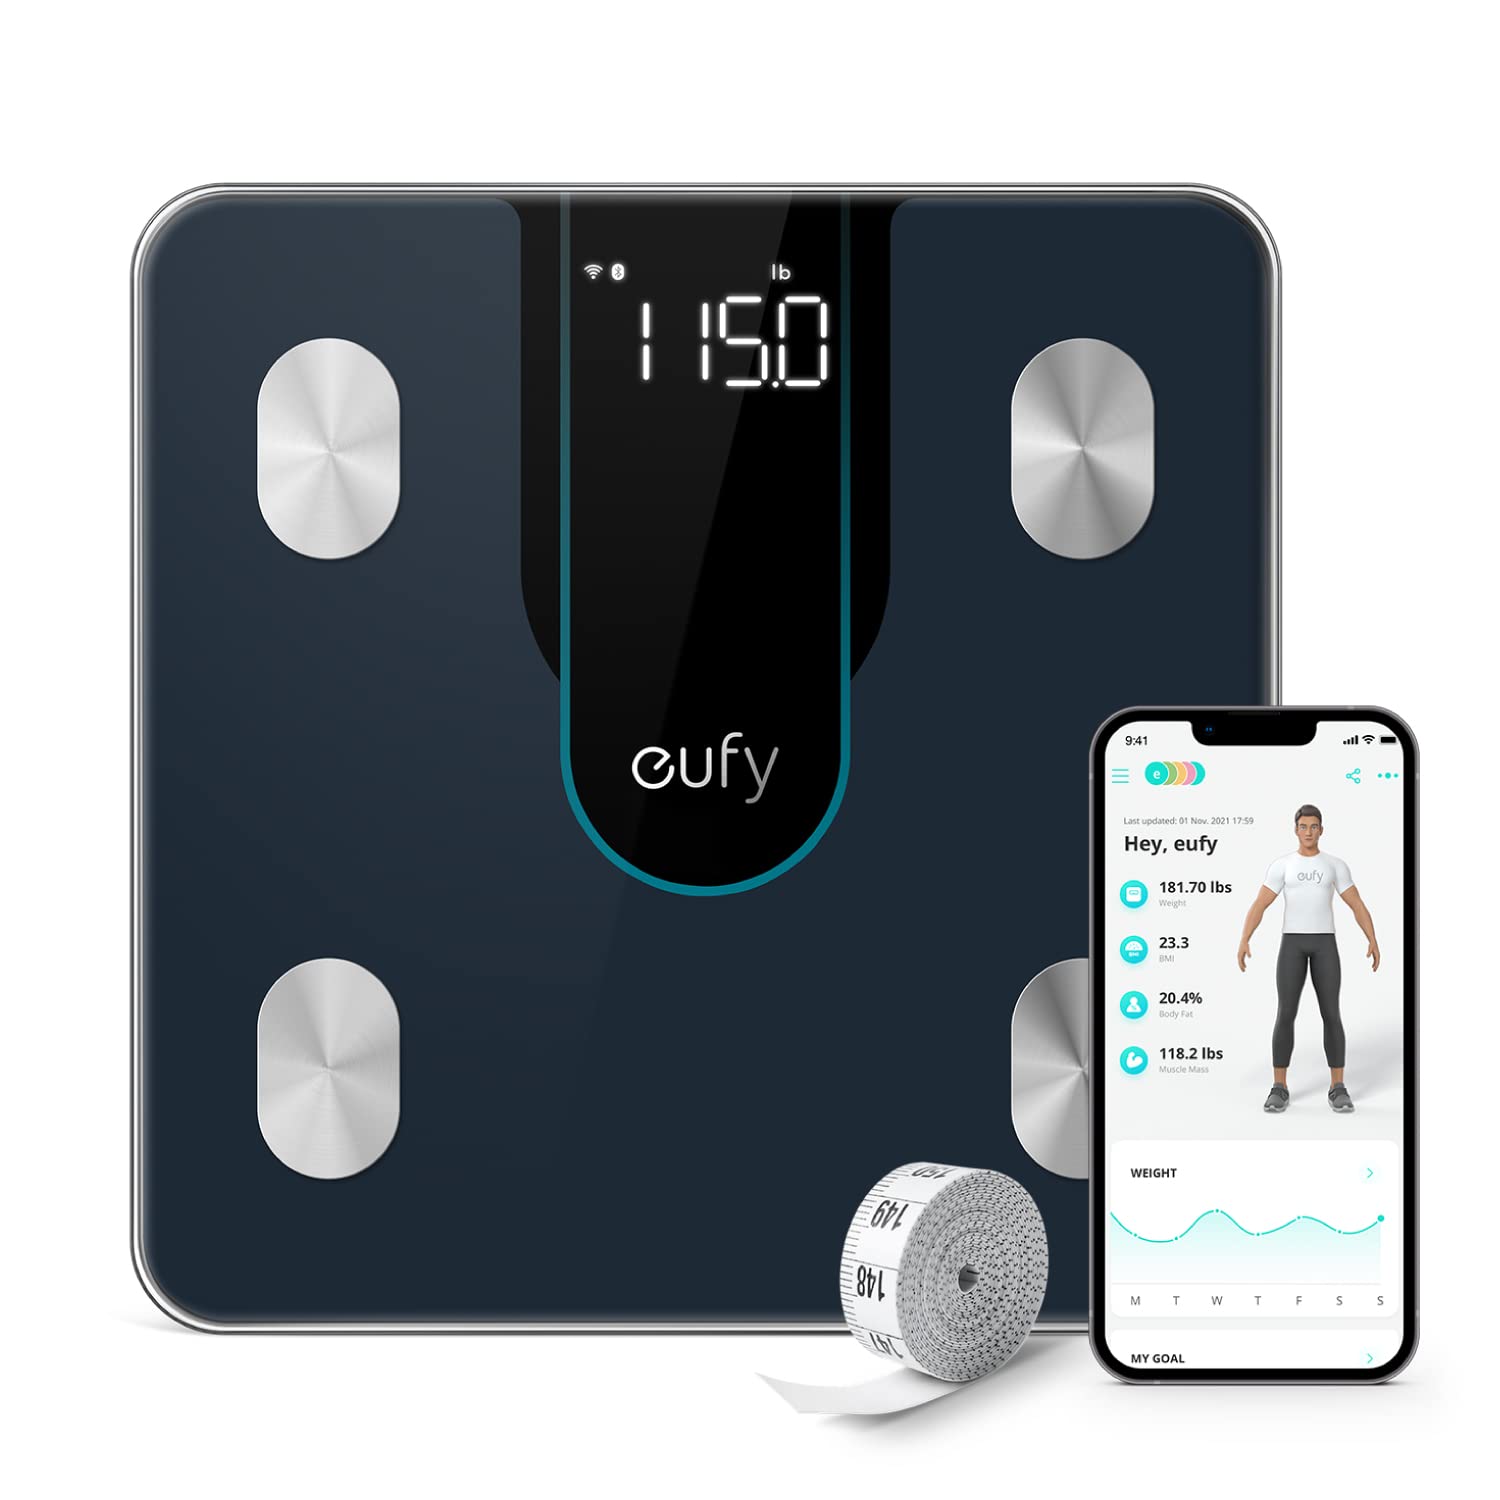  eufy Smart Scale with Bluetooth, Body Fat Scale, Wireless  Digital Bathroom Scale, 12 Measurements, Weight/Body Fat/BMI, Fitness Body  Composition Analysis, Black/White, lbs/kg. : Health & Household